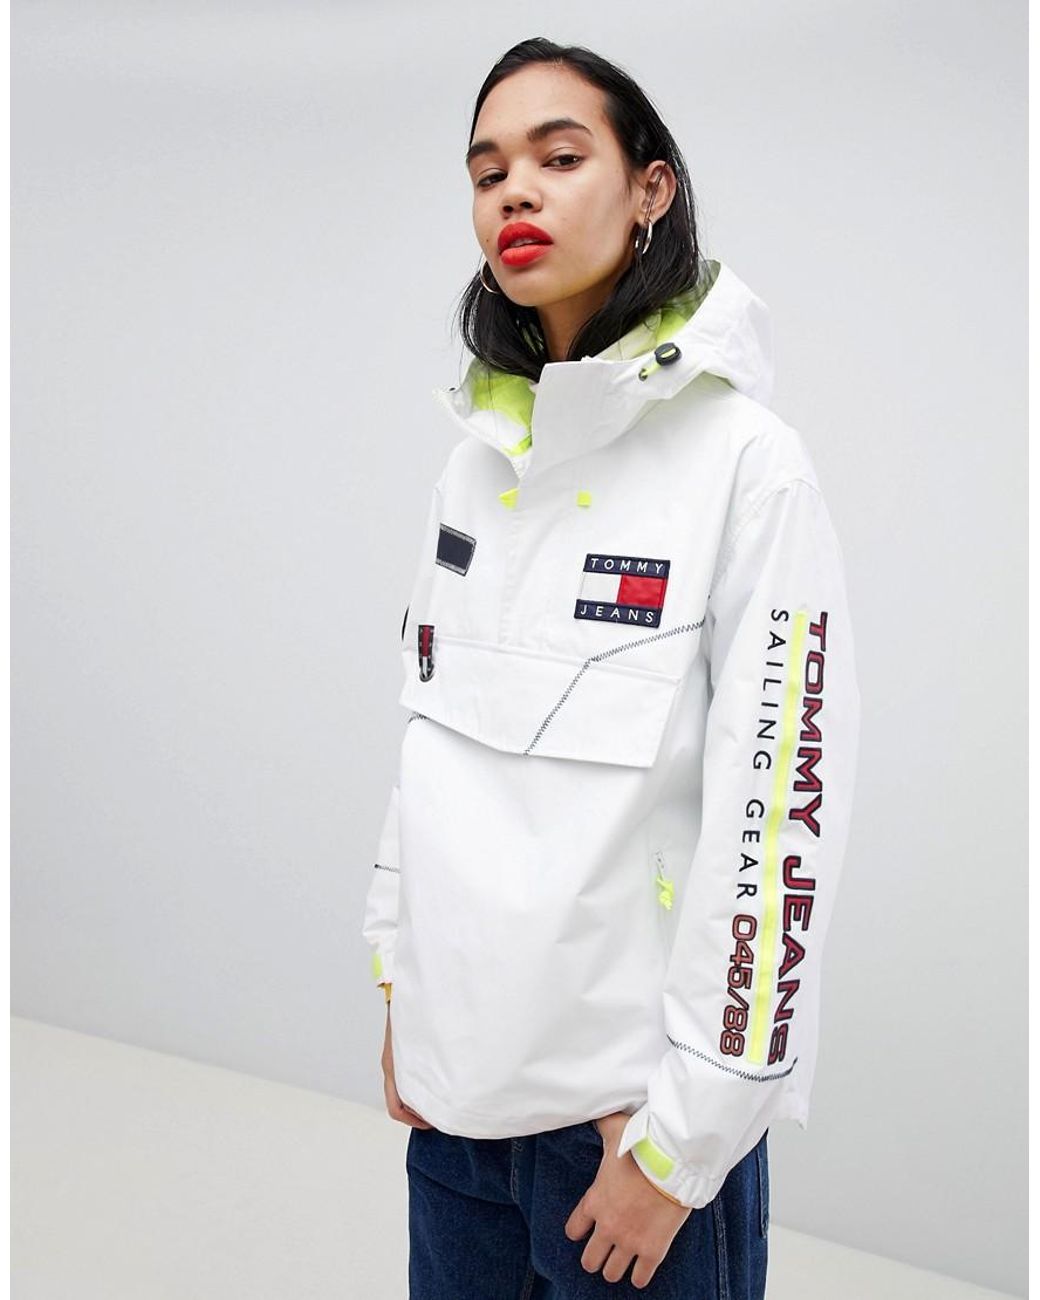 Tommy Hilfiger Denim Tommy Jean 90s Capsule 5.0 Oversized Sailing Jacket in  White | Lyst